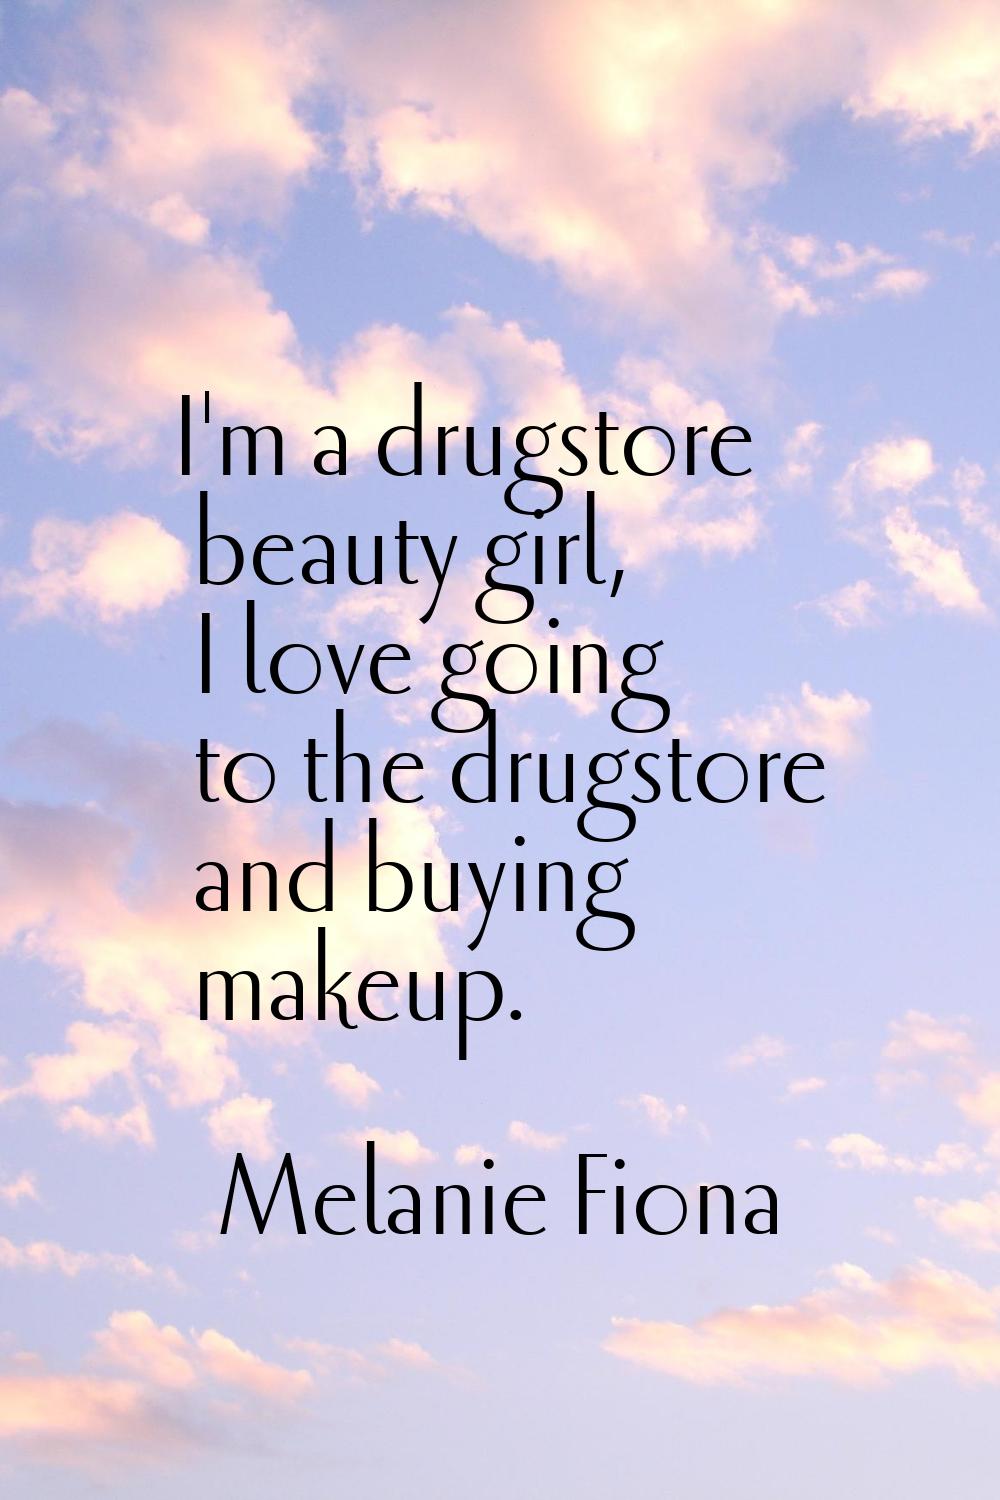 I'm a drugstore beauty girl, I love going to the drugstore and buying makeup.